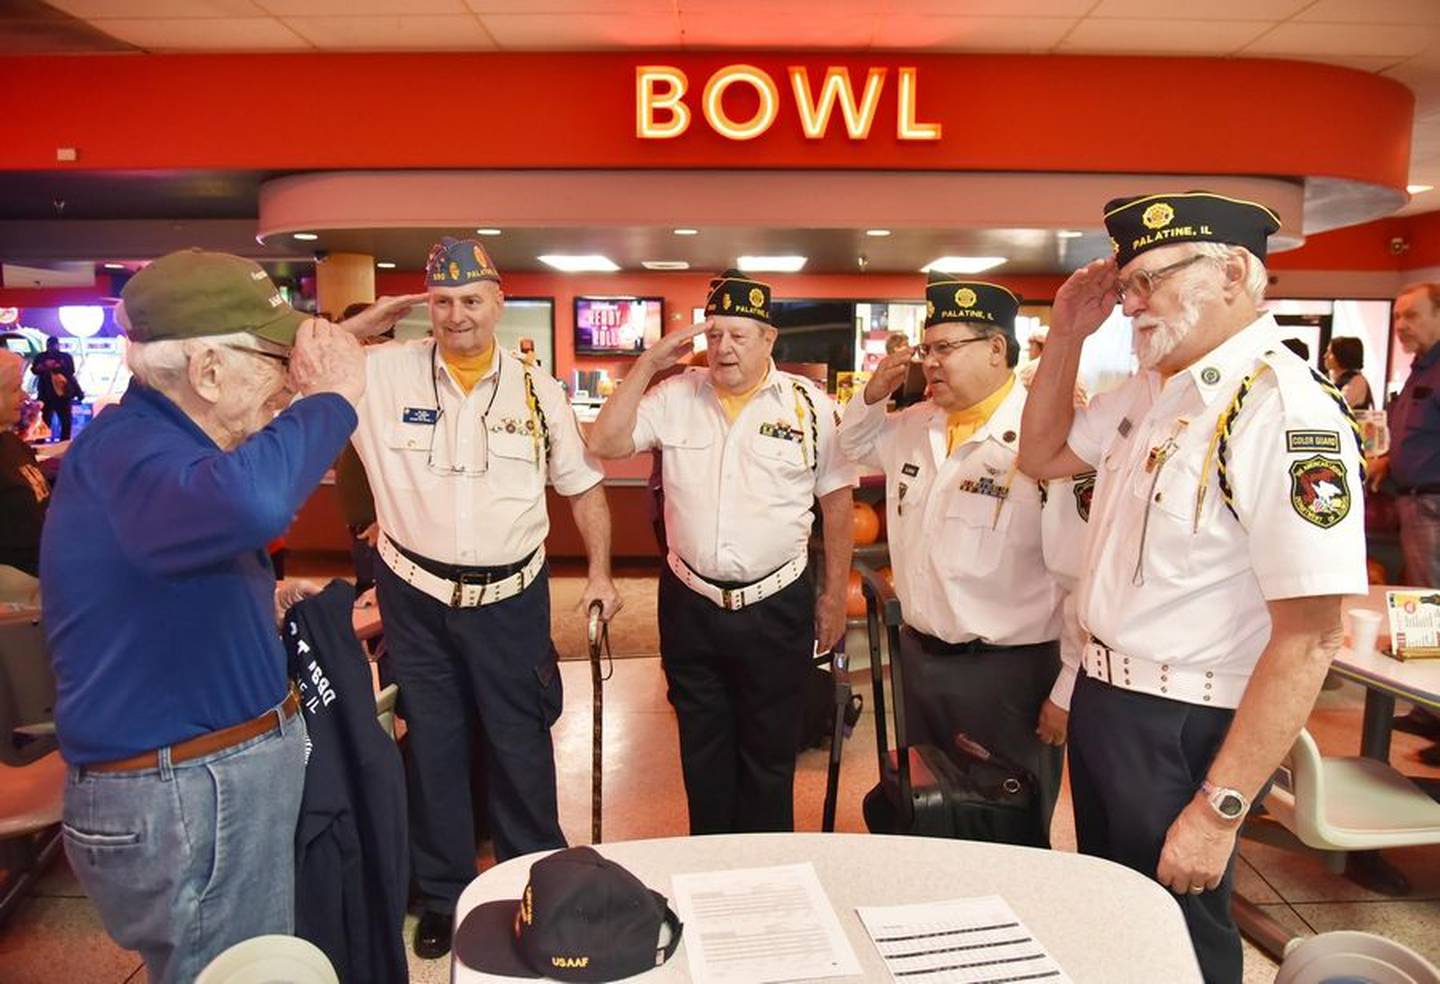 Members of the Palatine American Legion Post 690 Color Guard salute 103-year old bowler Ed Berthold of Fox River Grove, left, at Bowlero in Deer Park on Tuesday, Nov. 22, 2022. Berthold's decadeslong love affair with bowling began when he was stuck in Iceland while serving in World War II.